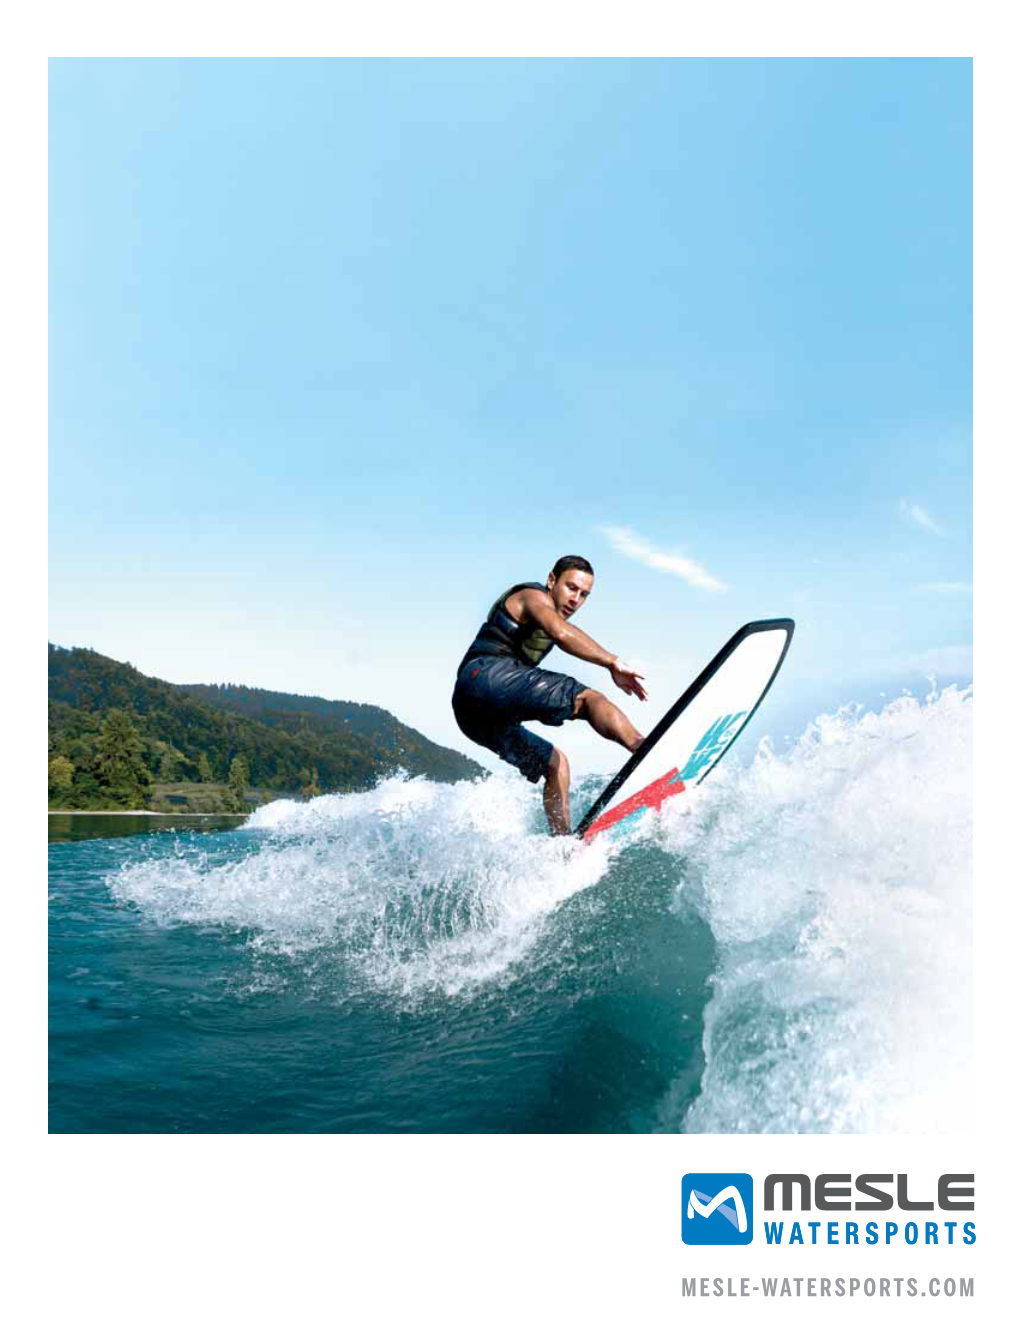 Mesle-Watersports.Com Contents